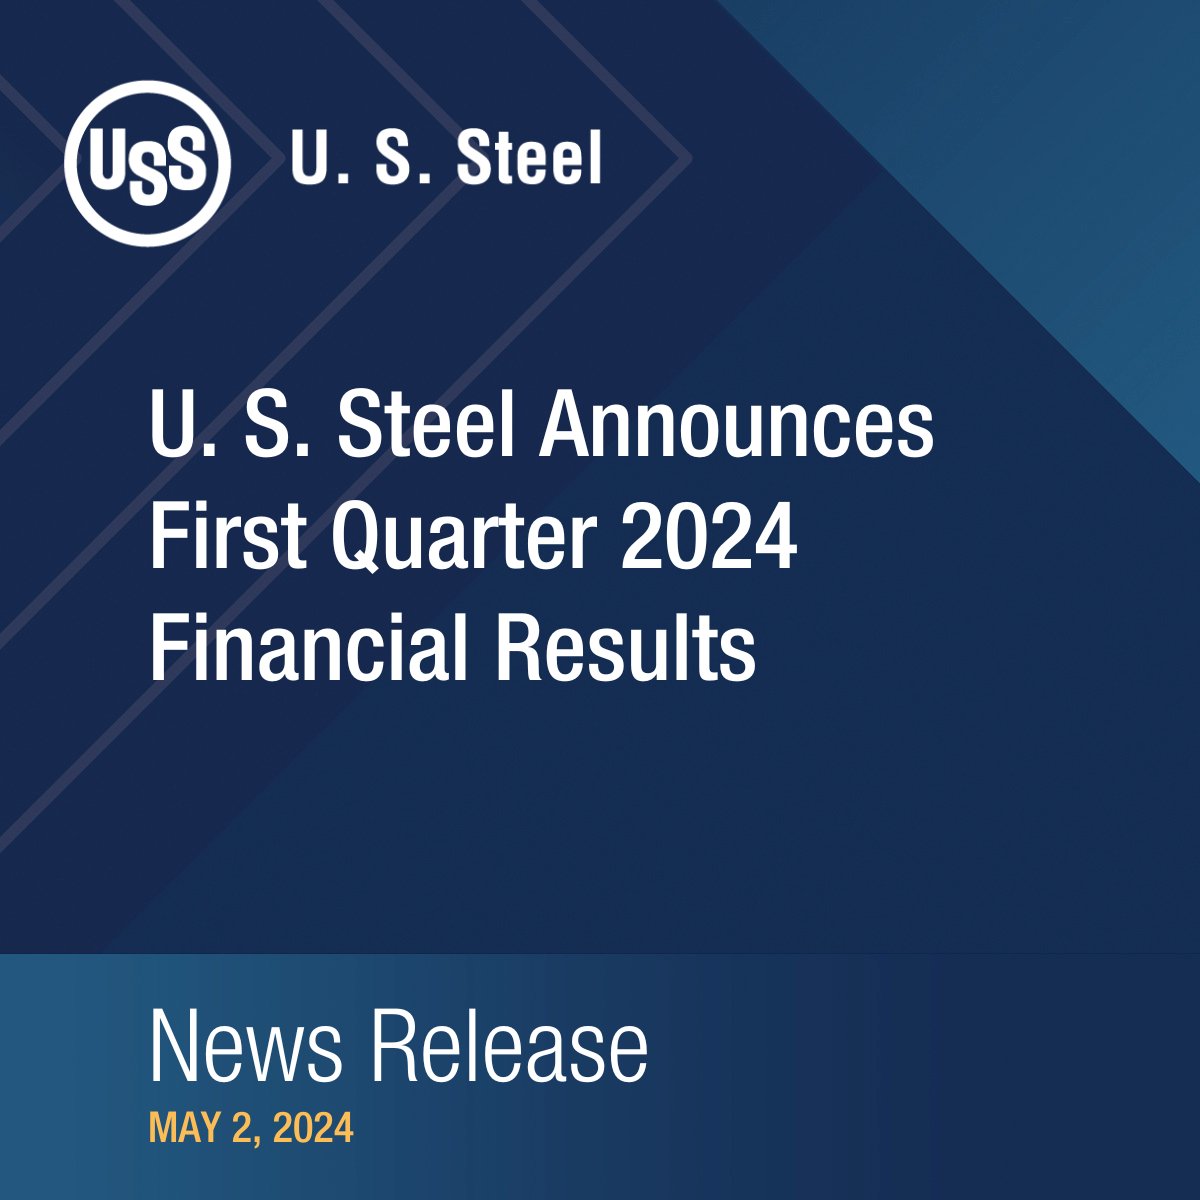 #USSteel safely delivered strong performance in the first quarter, including net earnings of $171 million. Our proven strategy continues to propel us forward as we deliver value for our stockholders. View Q1 #earnings here: ow.ly/WKKe50Rvcob